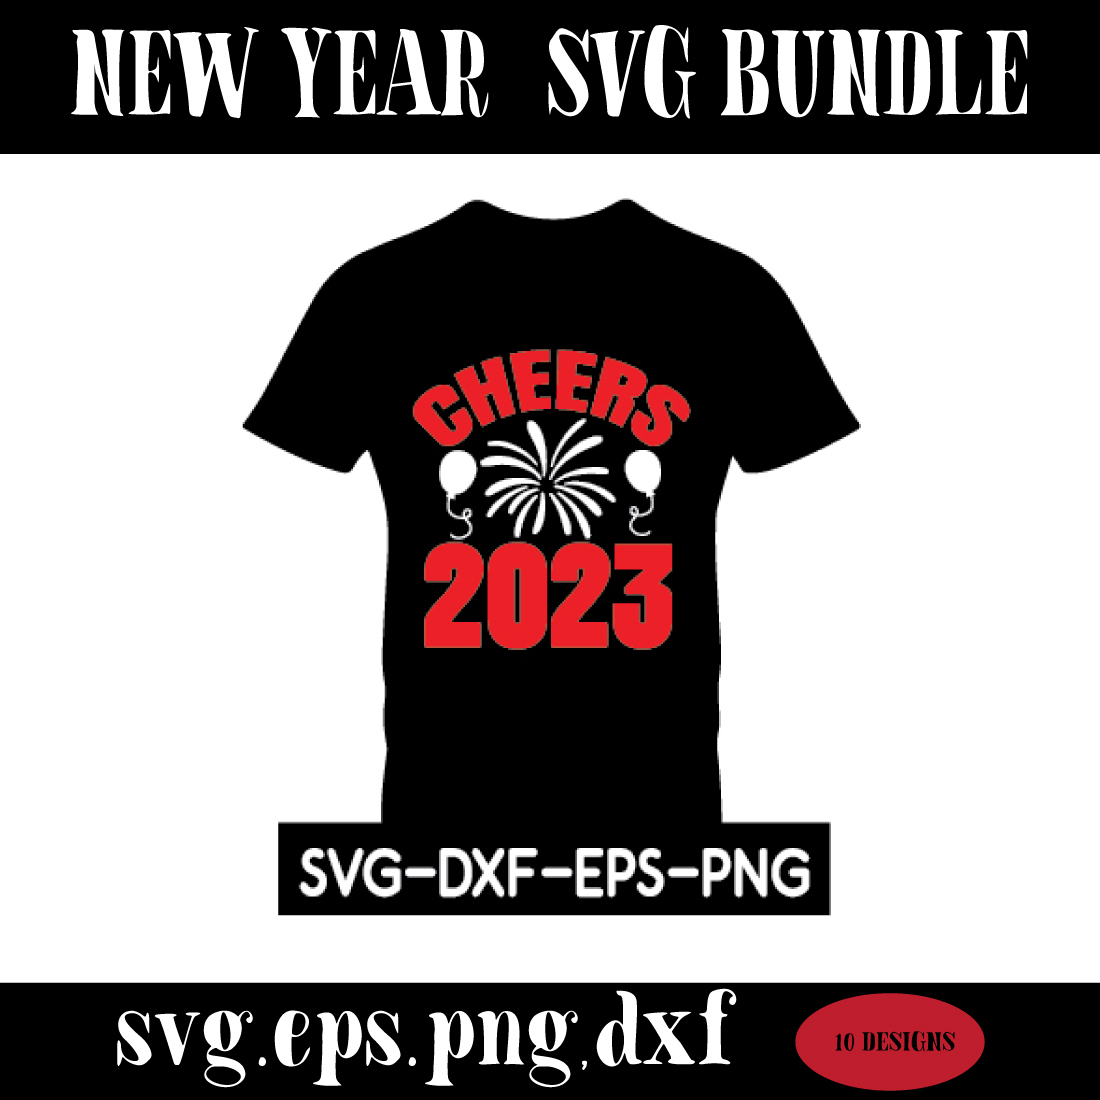 new year svg bundle preview image.